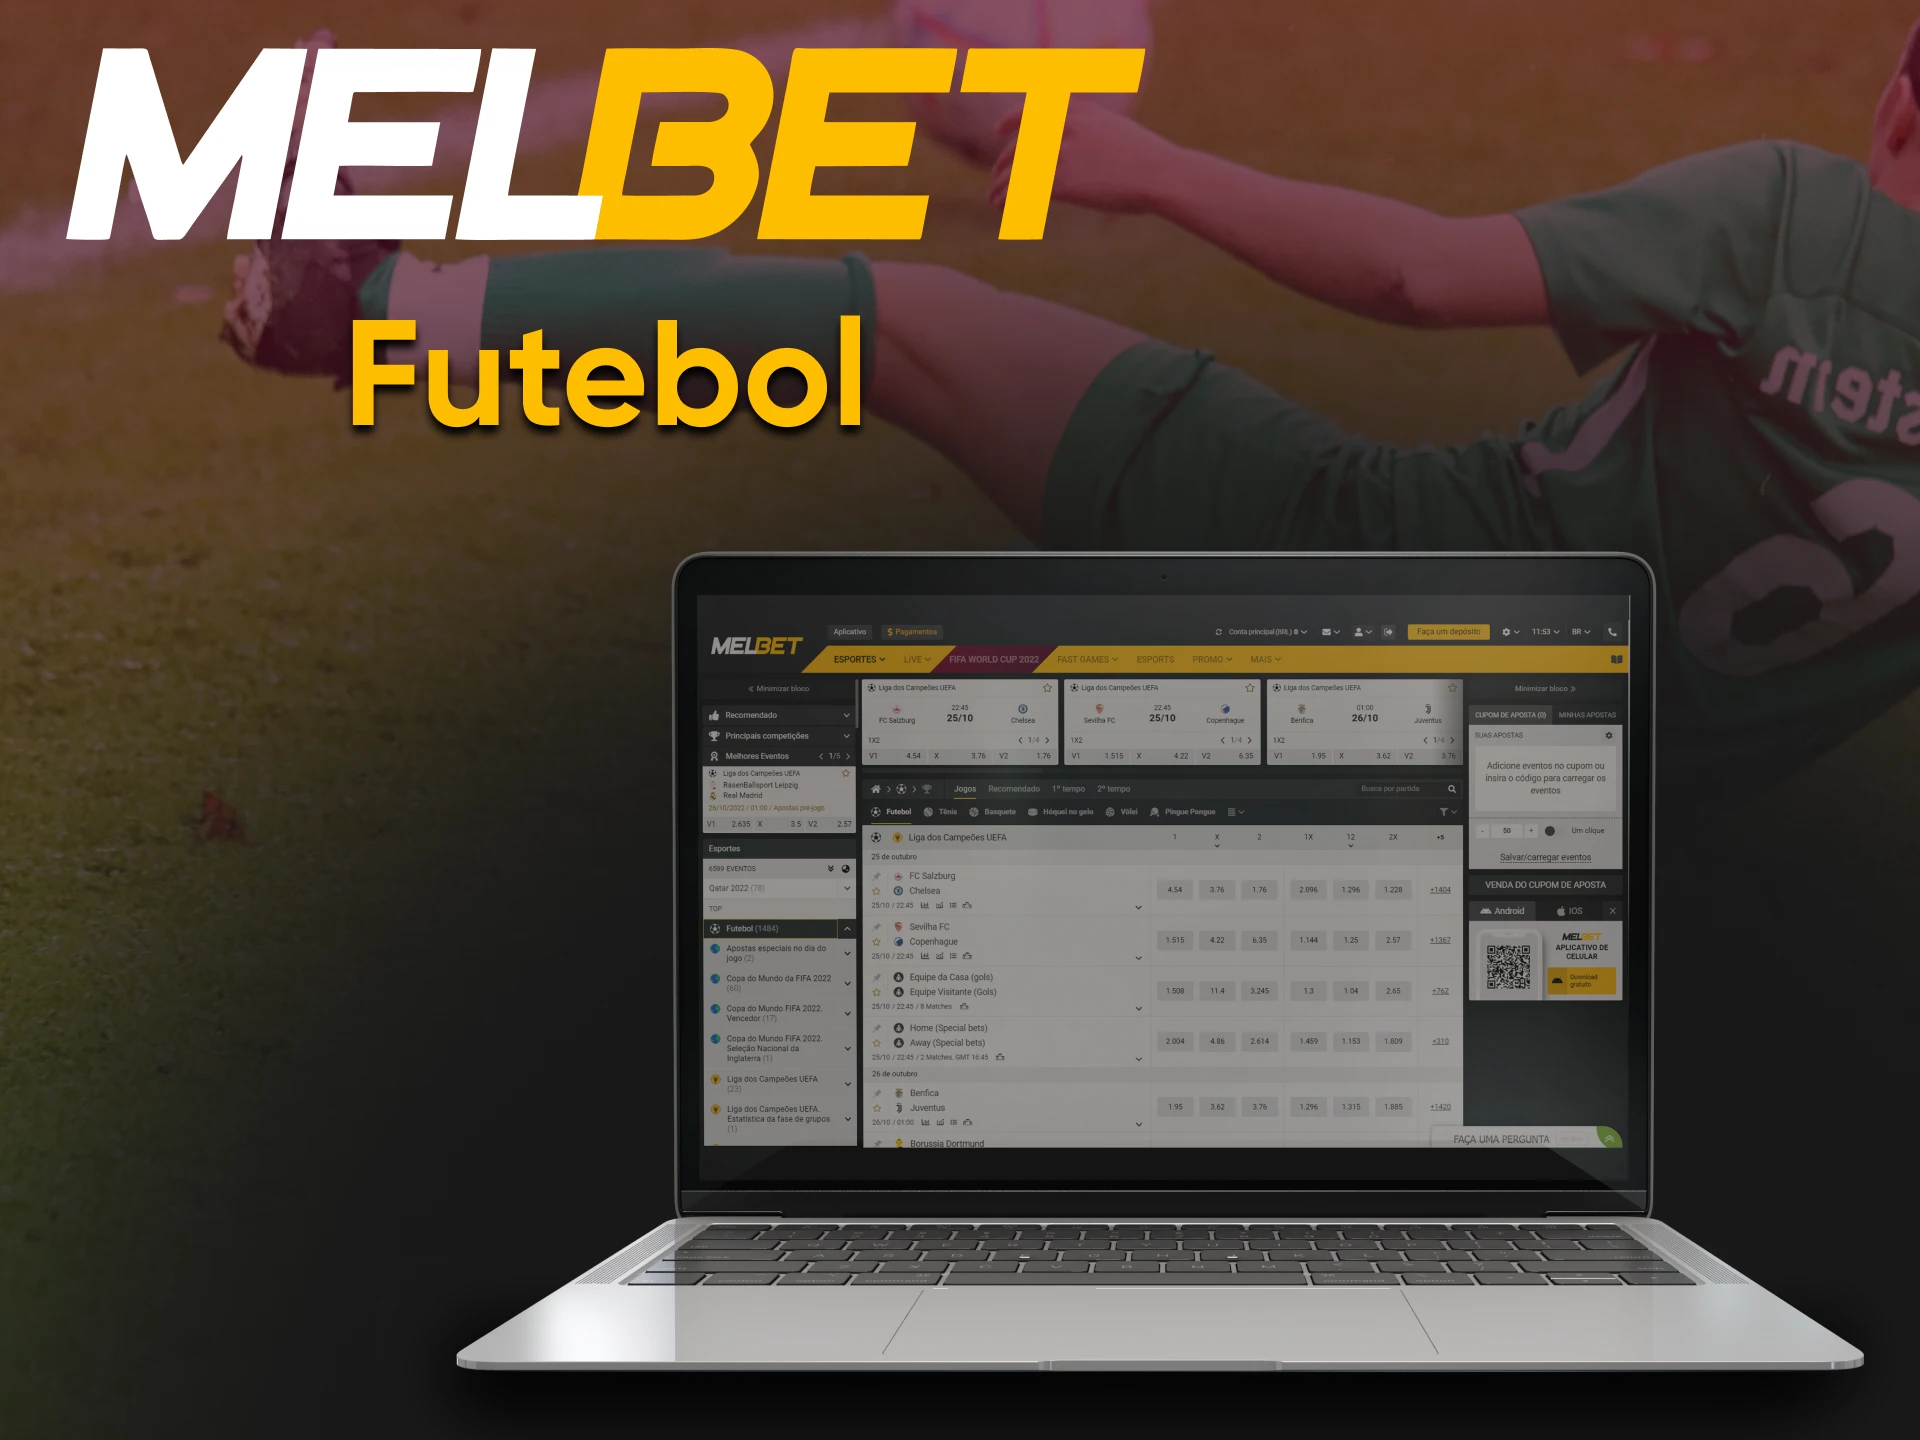 There are football bets from Melbet.